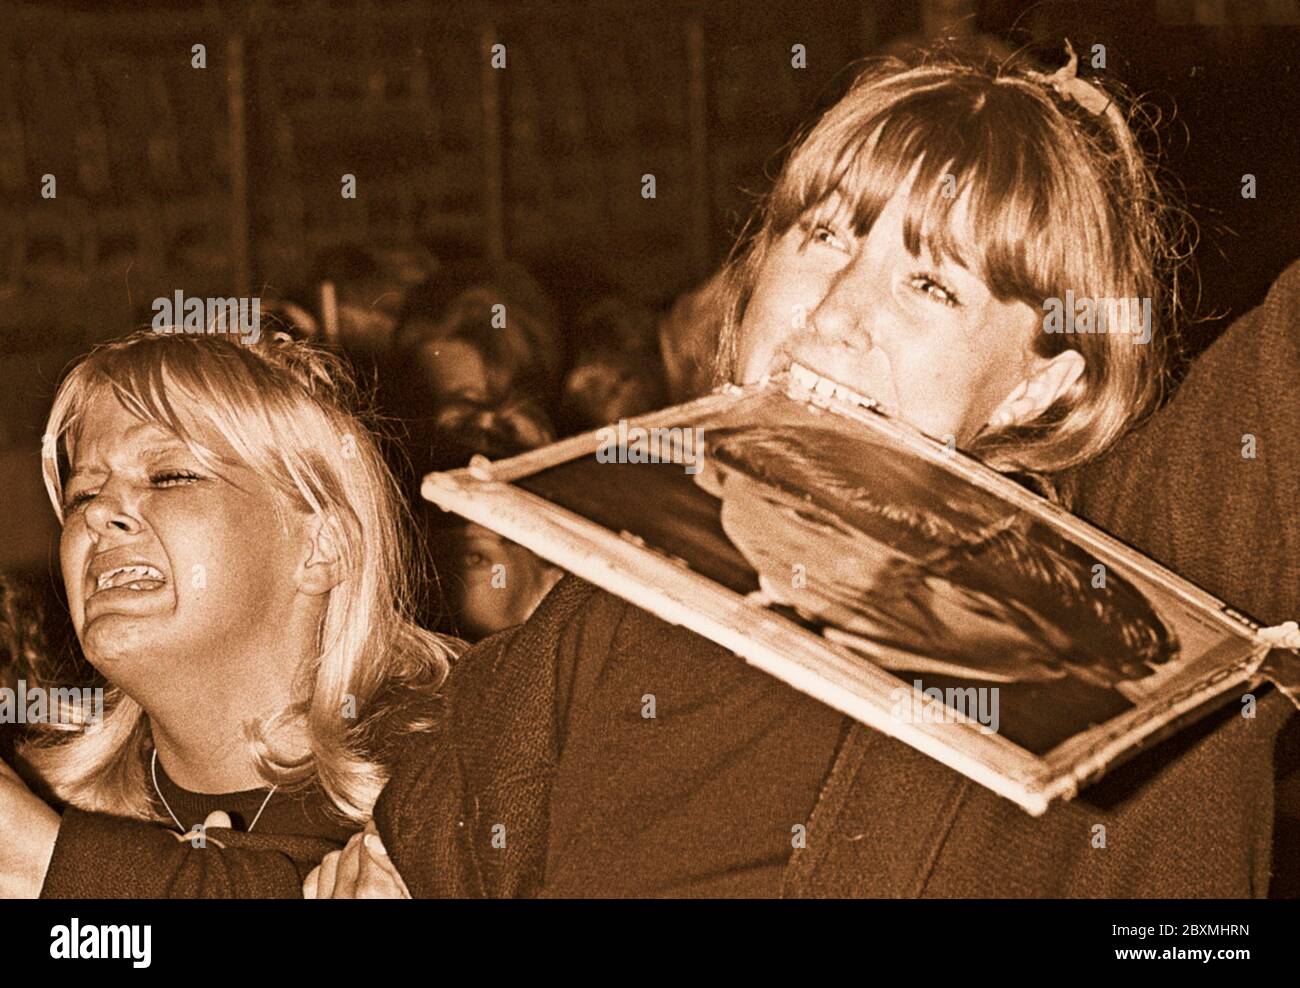 Beatles in the 1960s. Fans at a Beatles concert in Stockholm 1964 July 28 on Johanneshov stadion. Pictured a scene from the concert and the audience who is in extacy. The girl on the right  is holding a portrait of Ringo Starr in her mouth. Stock Photo